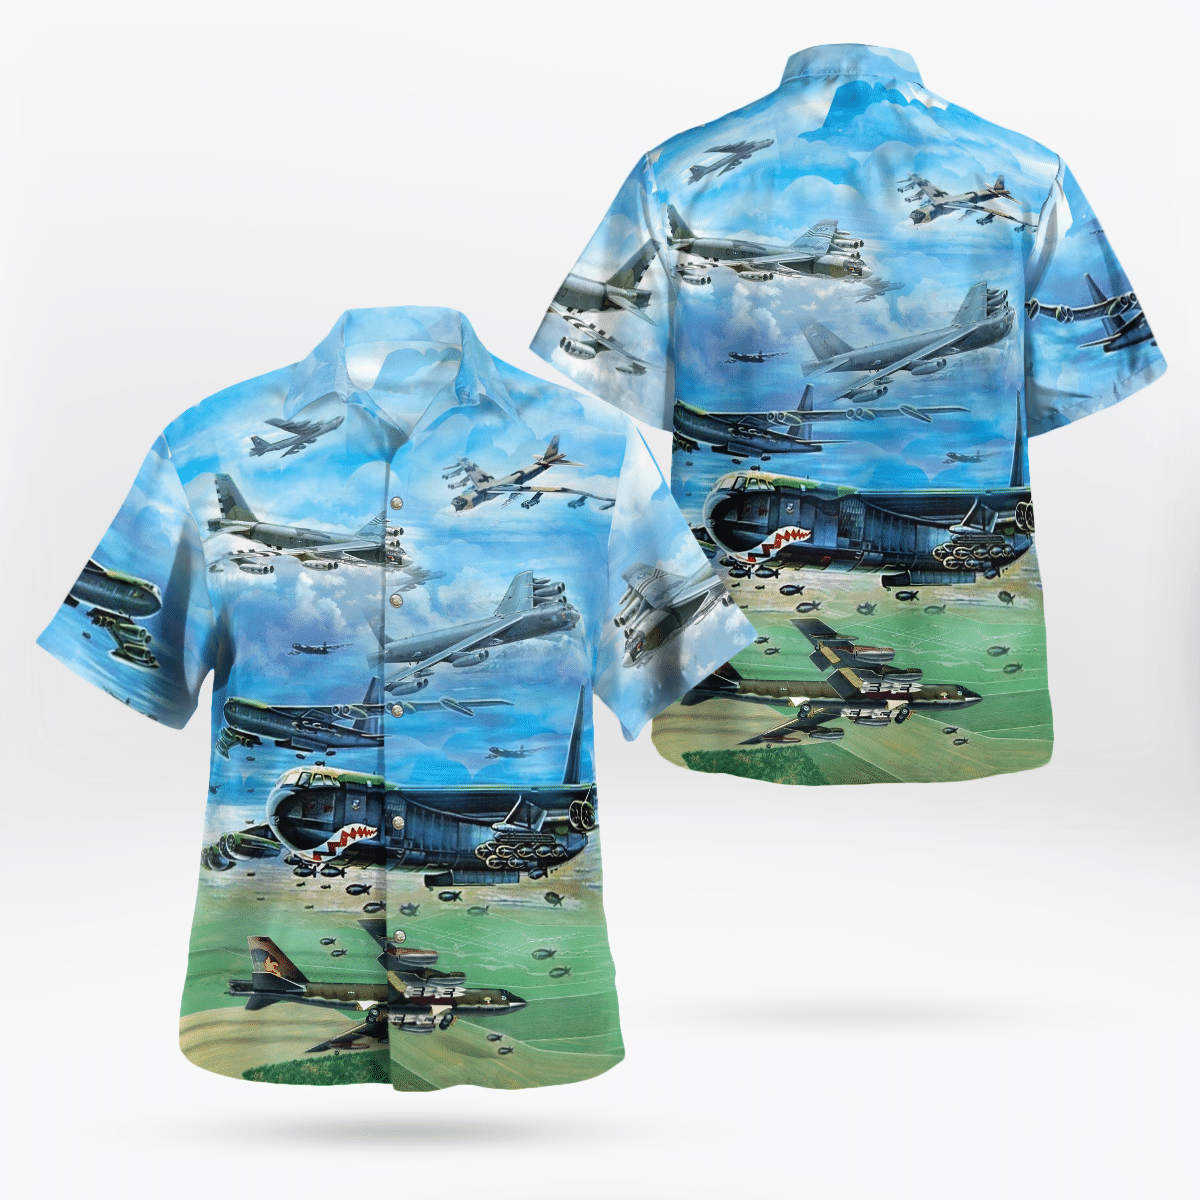 Consider getting these Hawaiian Shirt for your friends 361